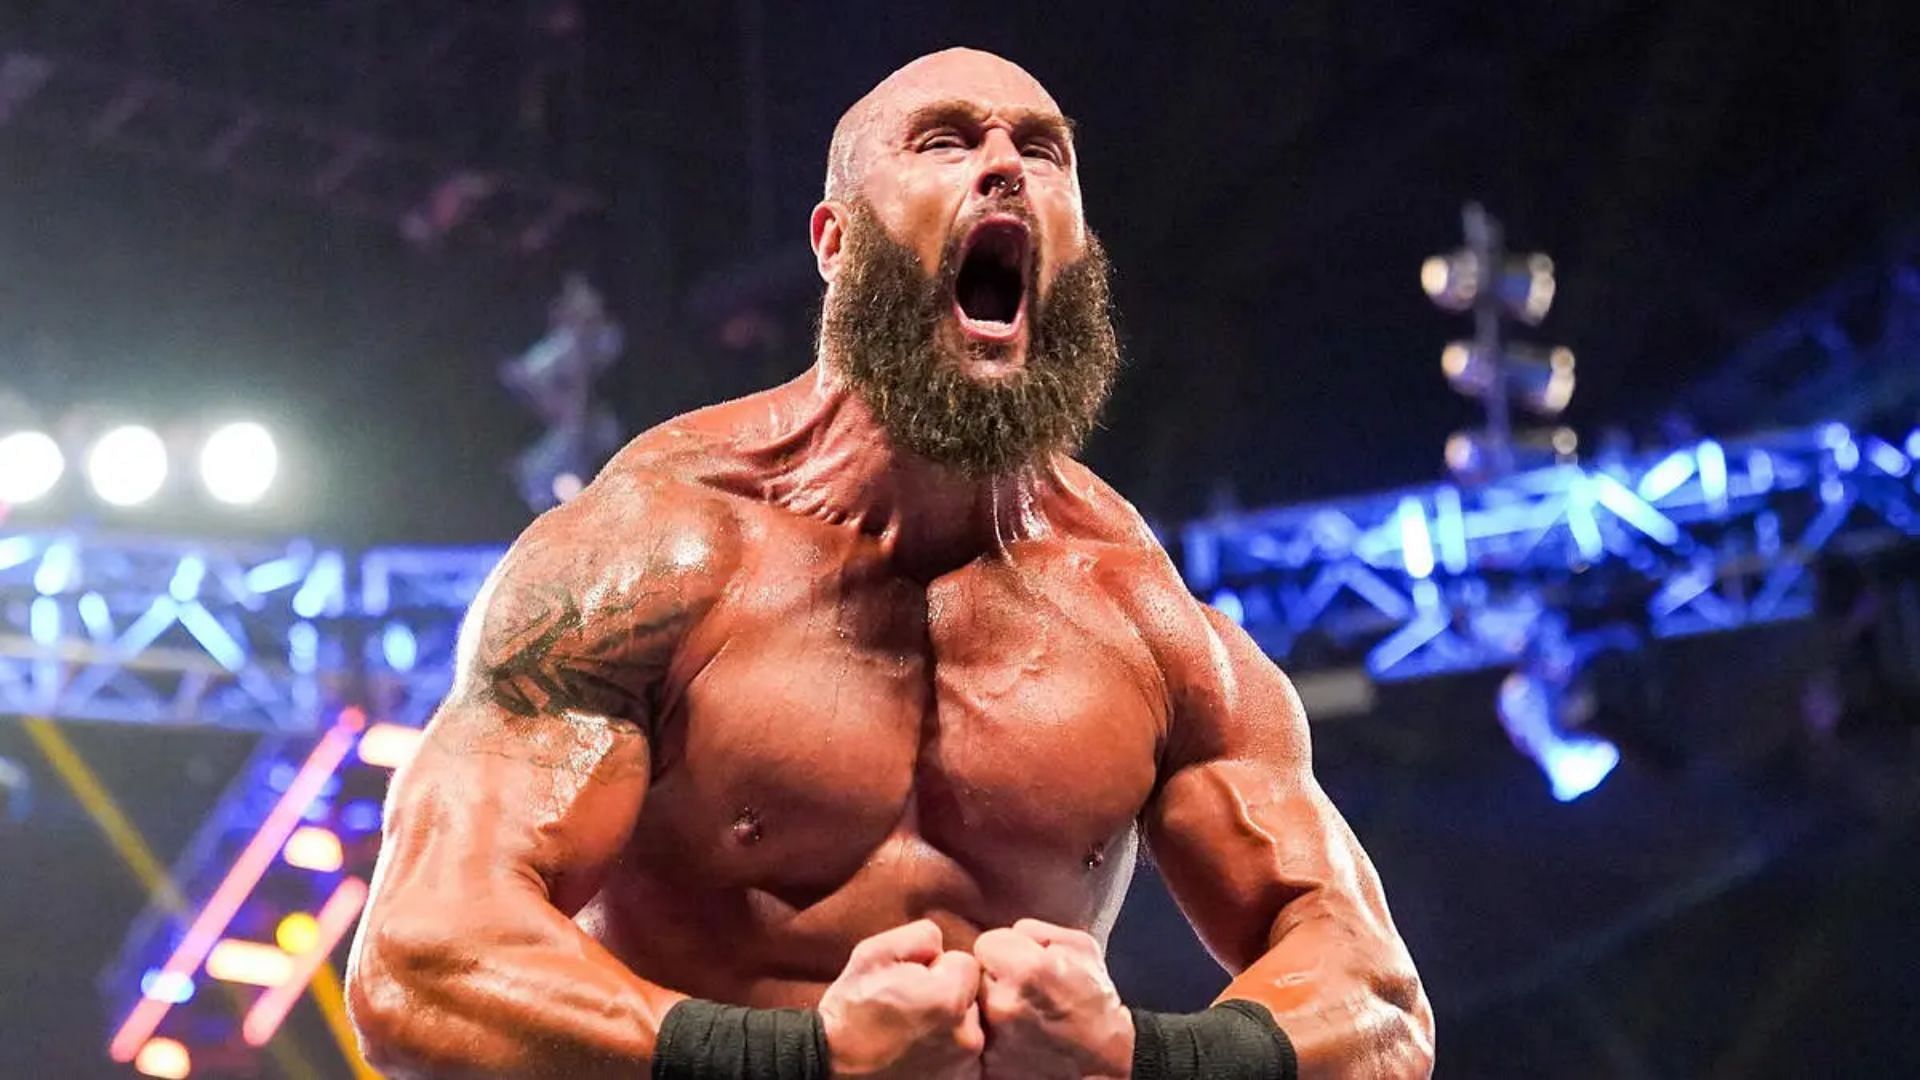 Braun Strowman is in a budding feud with Gunther on SmackDown